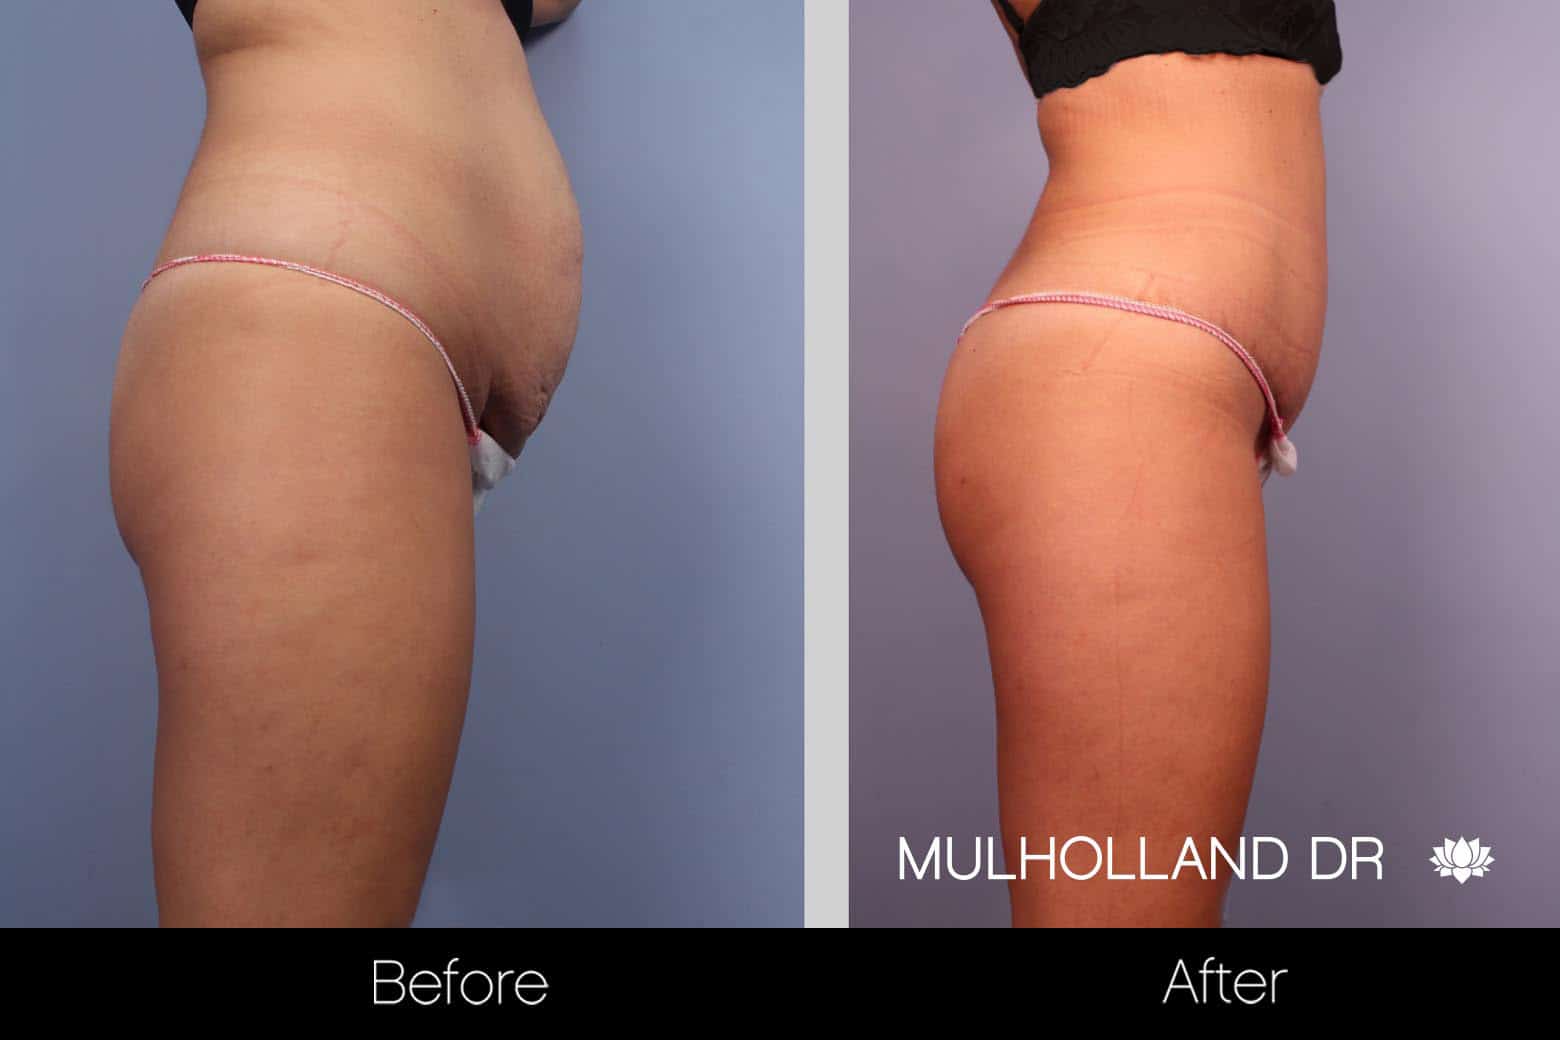 Before and After photos of Mini Tummy Tuck in Toronto Plastic Surgeons Clinic.